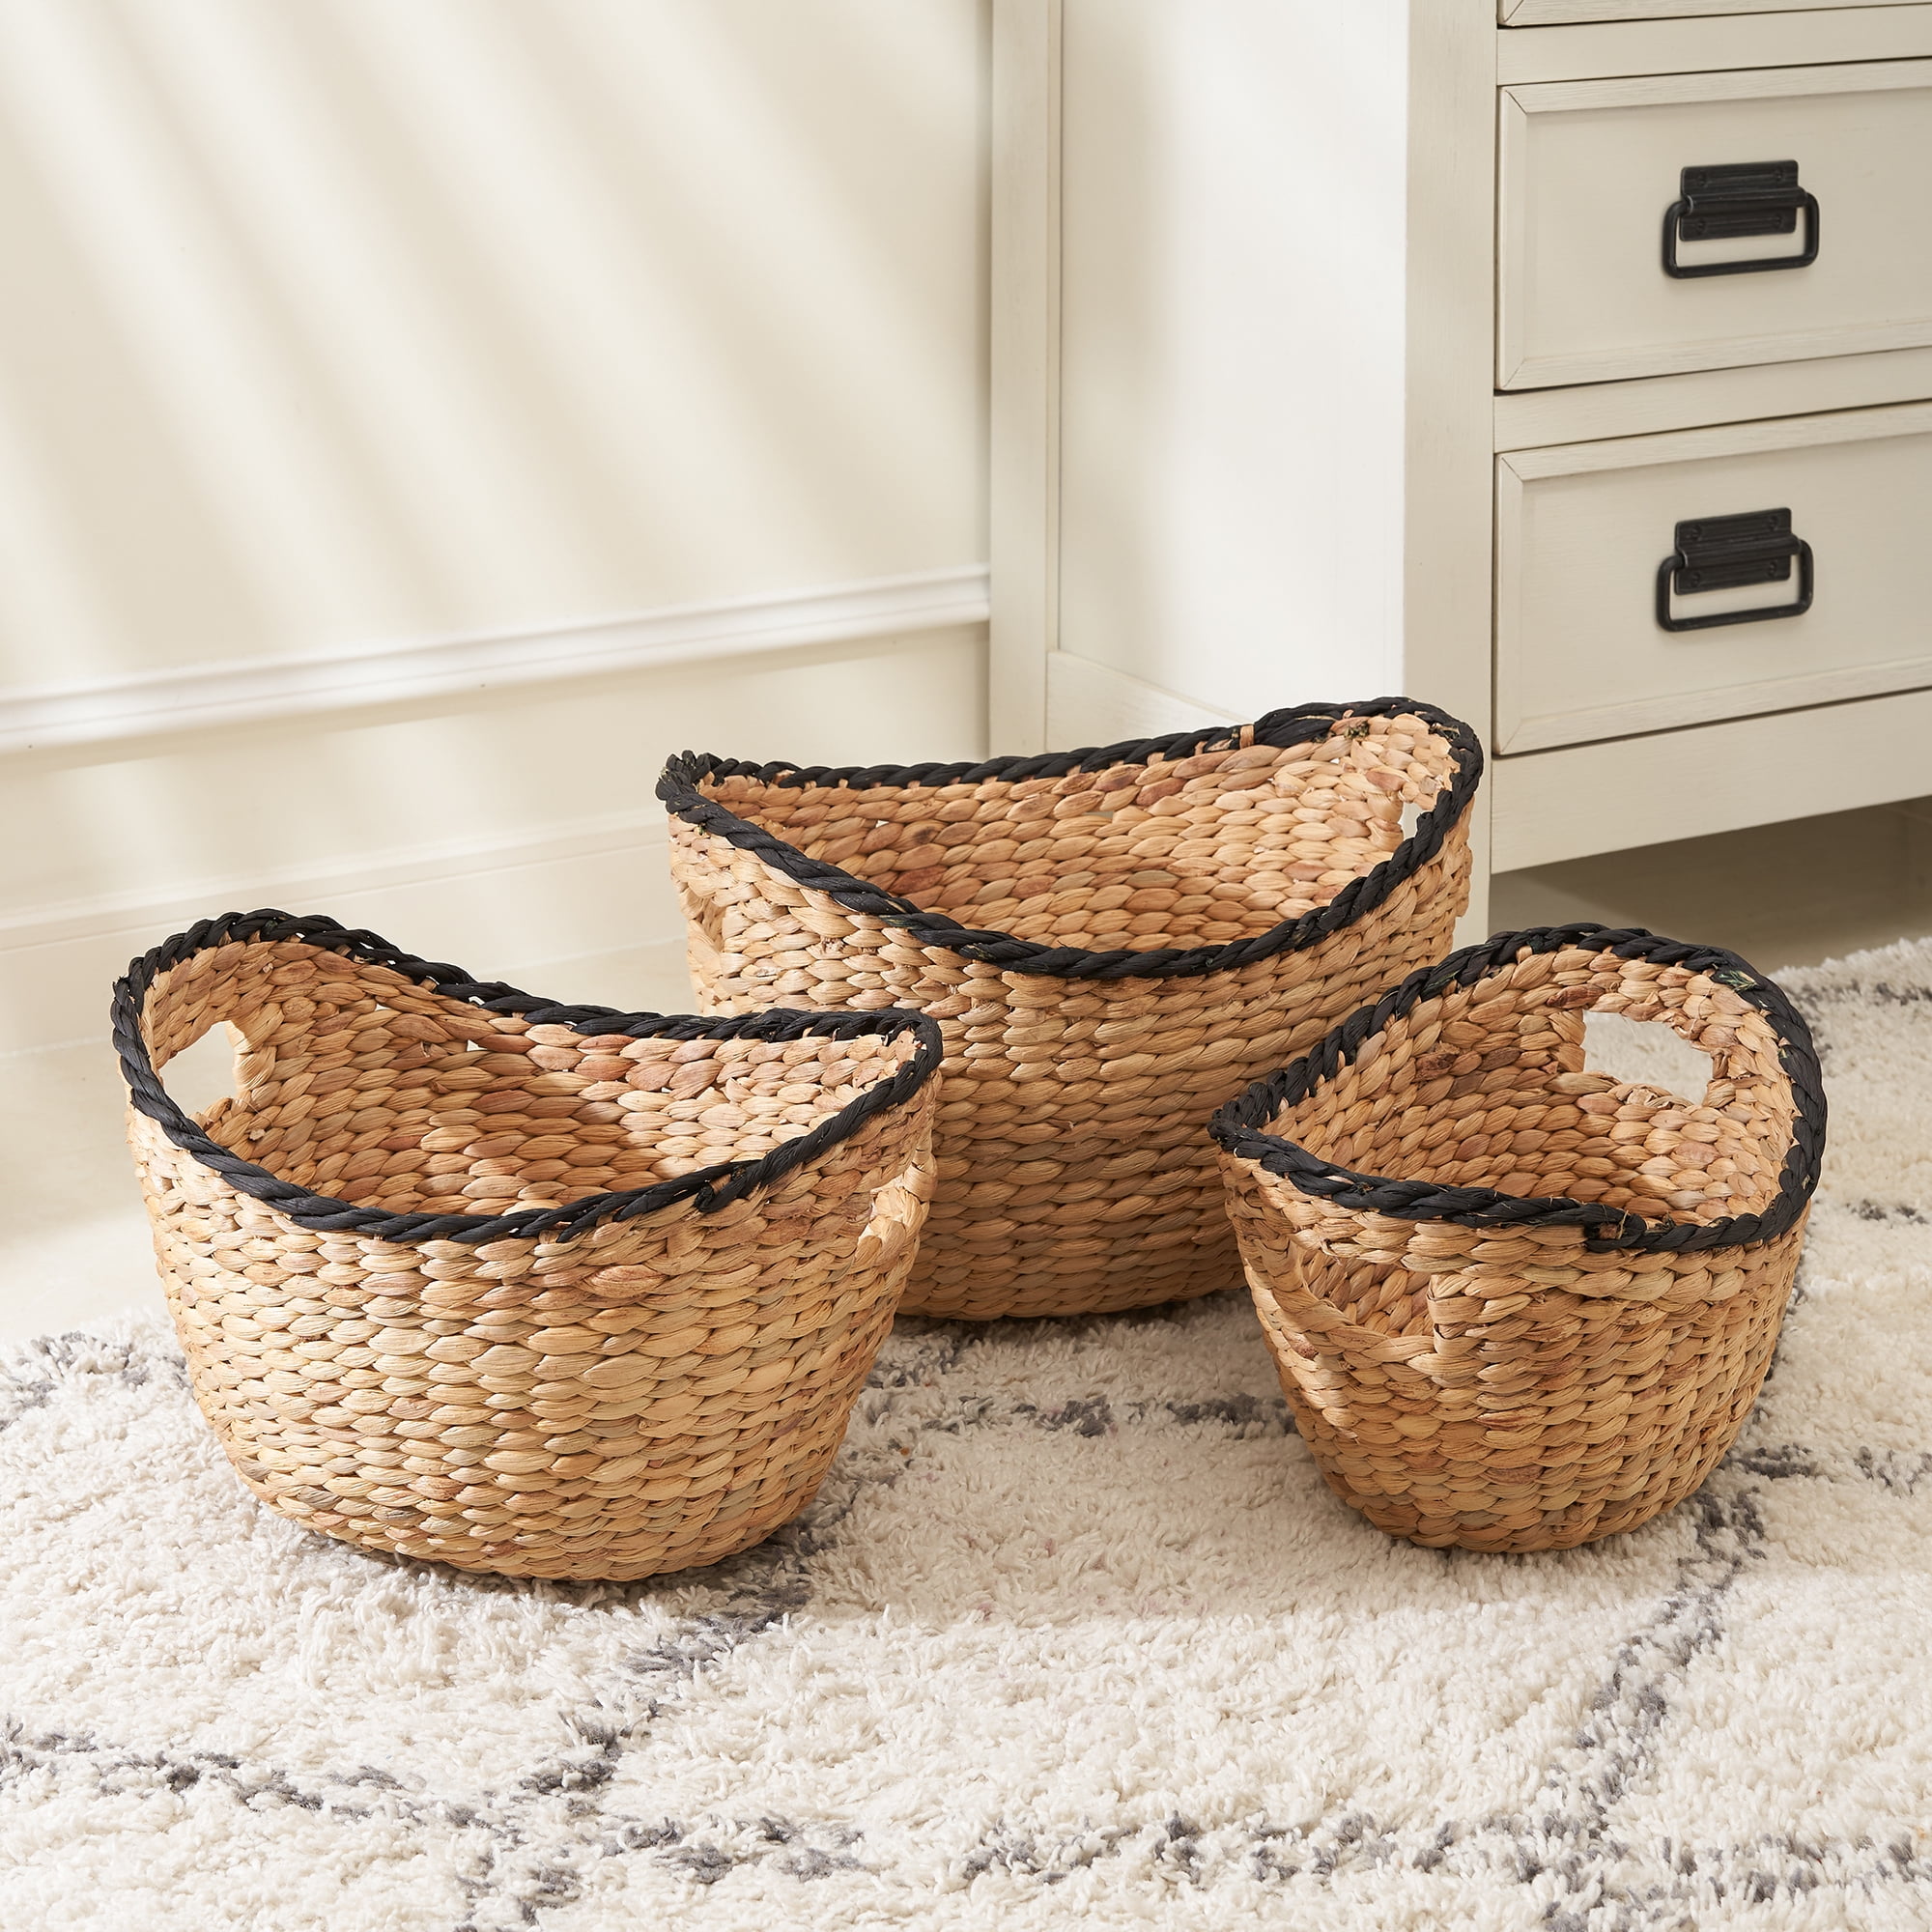 Eliana 3-piece Assorted Stackable Boat Shape Hand-woven Water Hyacinth Storage Basket Set with Black Rim and Hole Handles